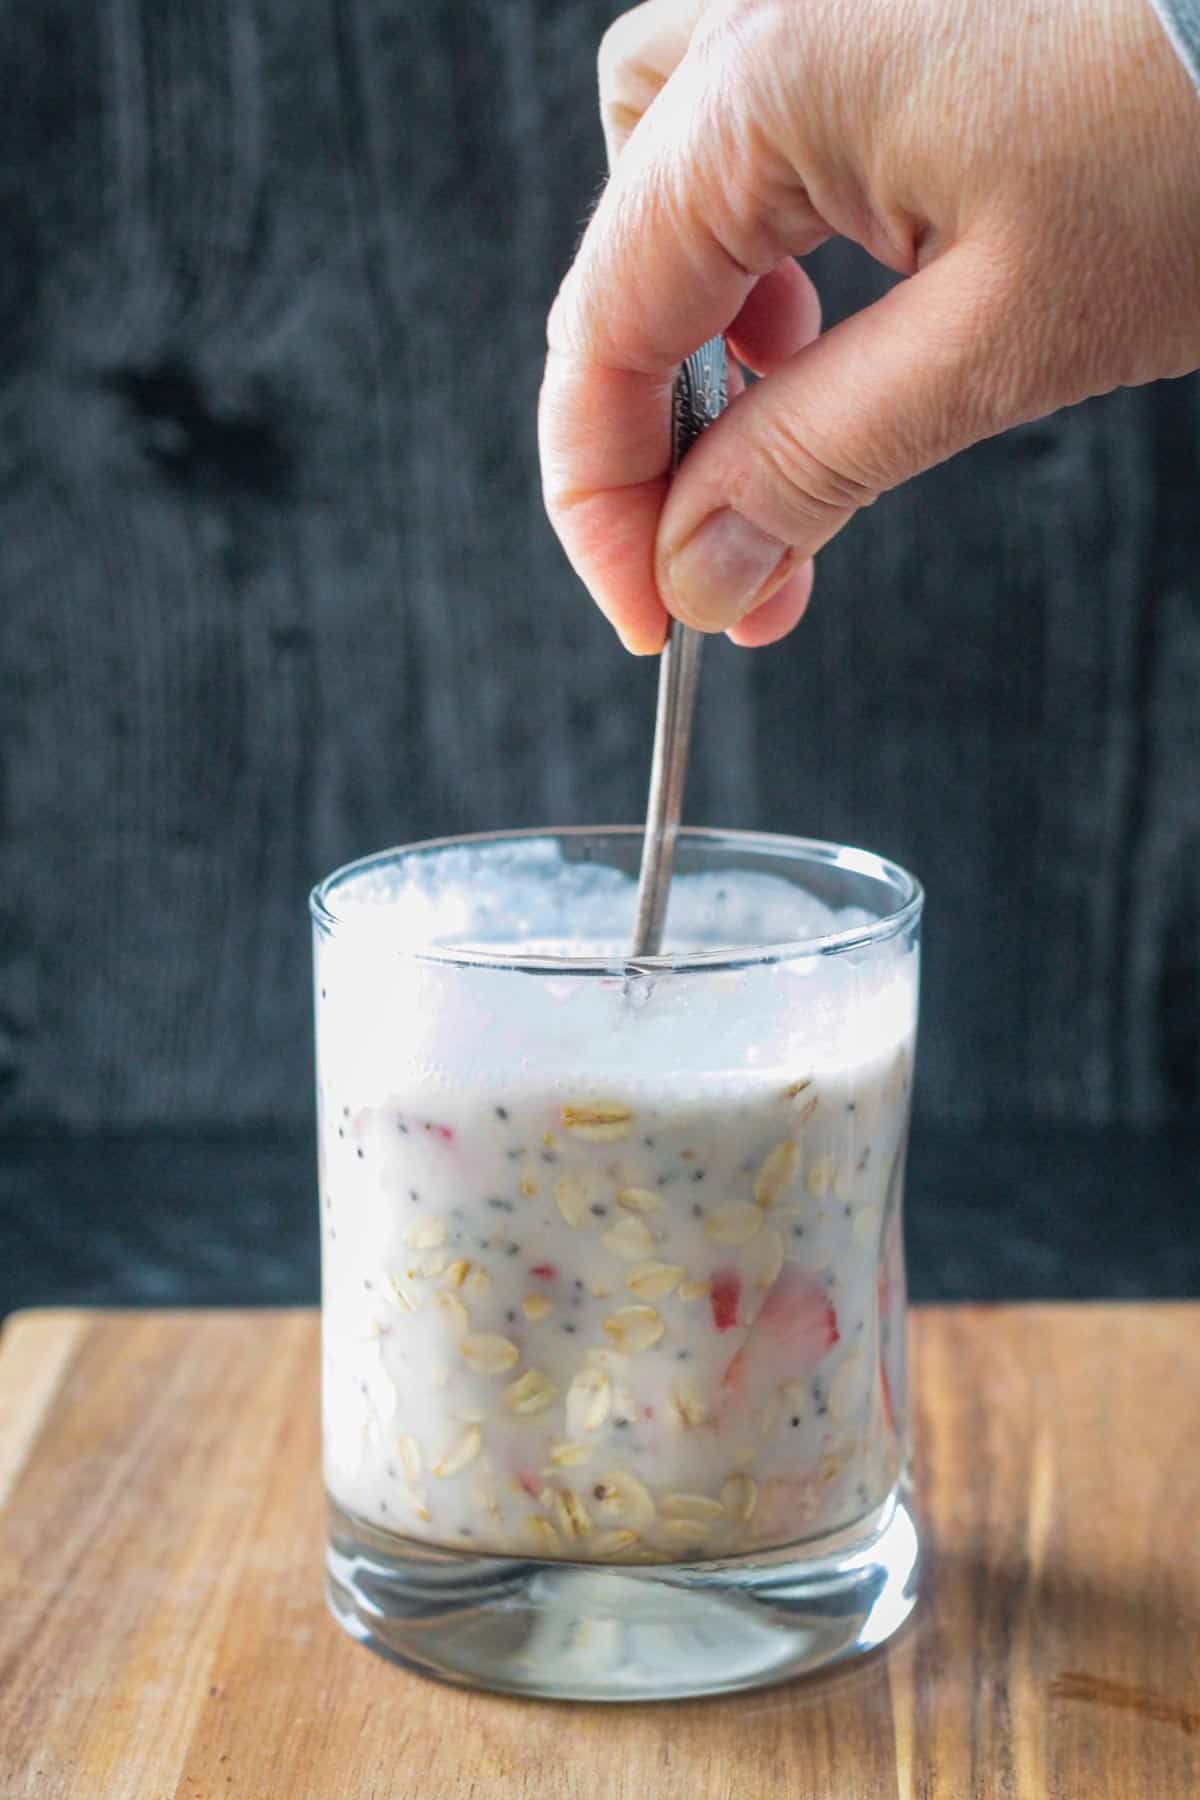 Stirring the overnight oats with coconut milk in a glass.